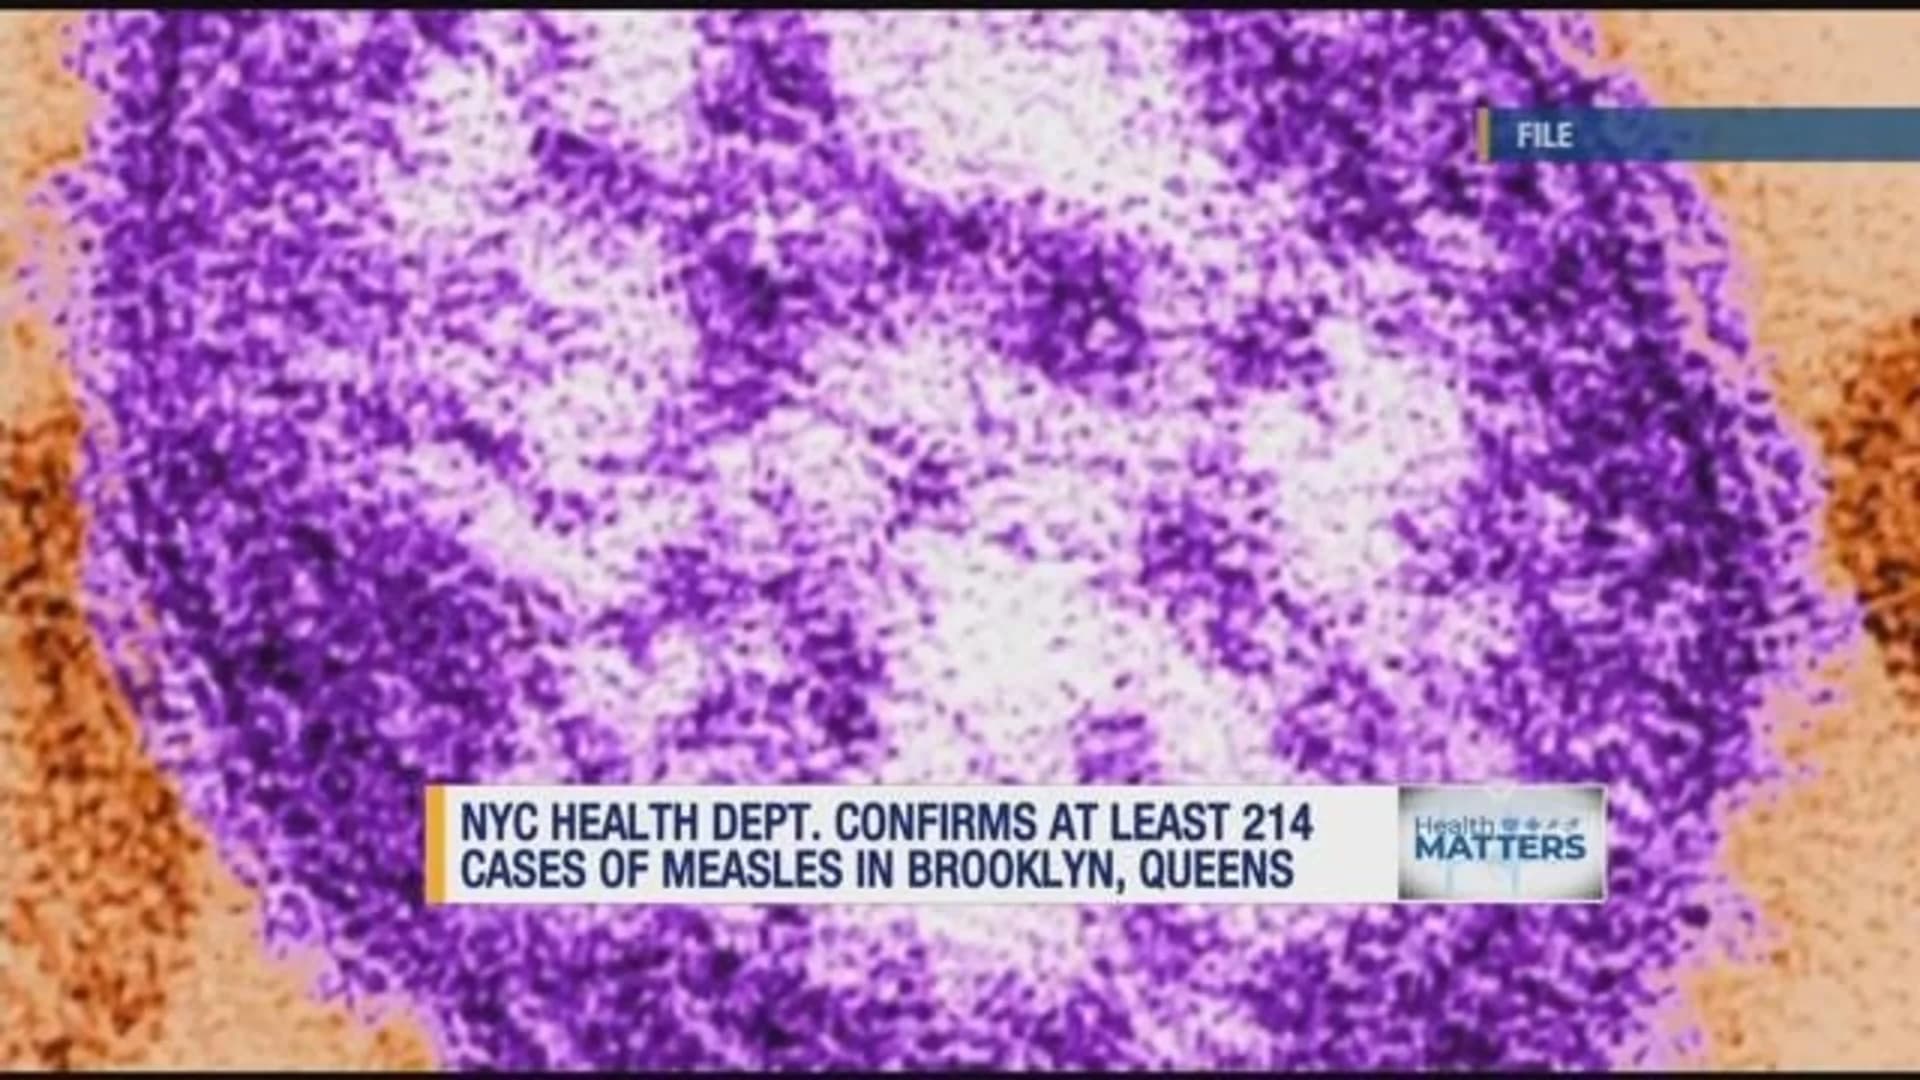 NYC DOH: At least 214 cases of measles in Brooklyn, Queens